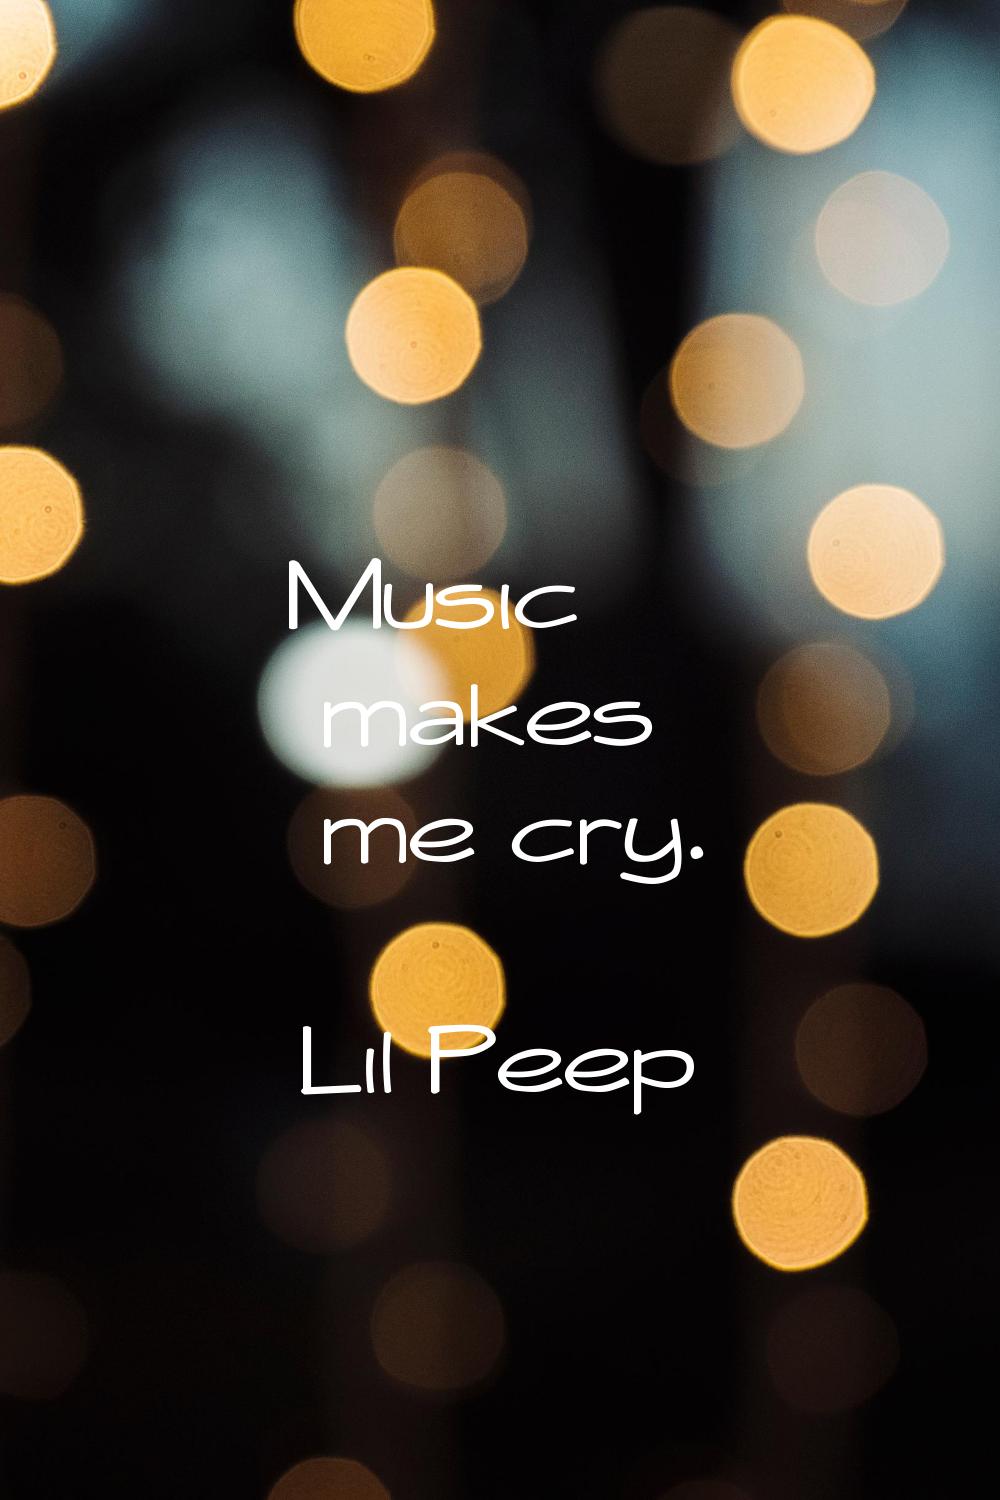 Music makes me cry.